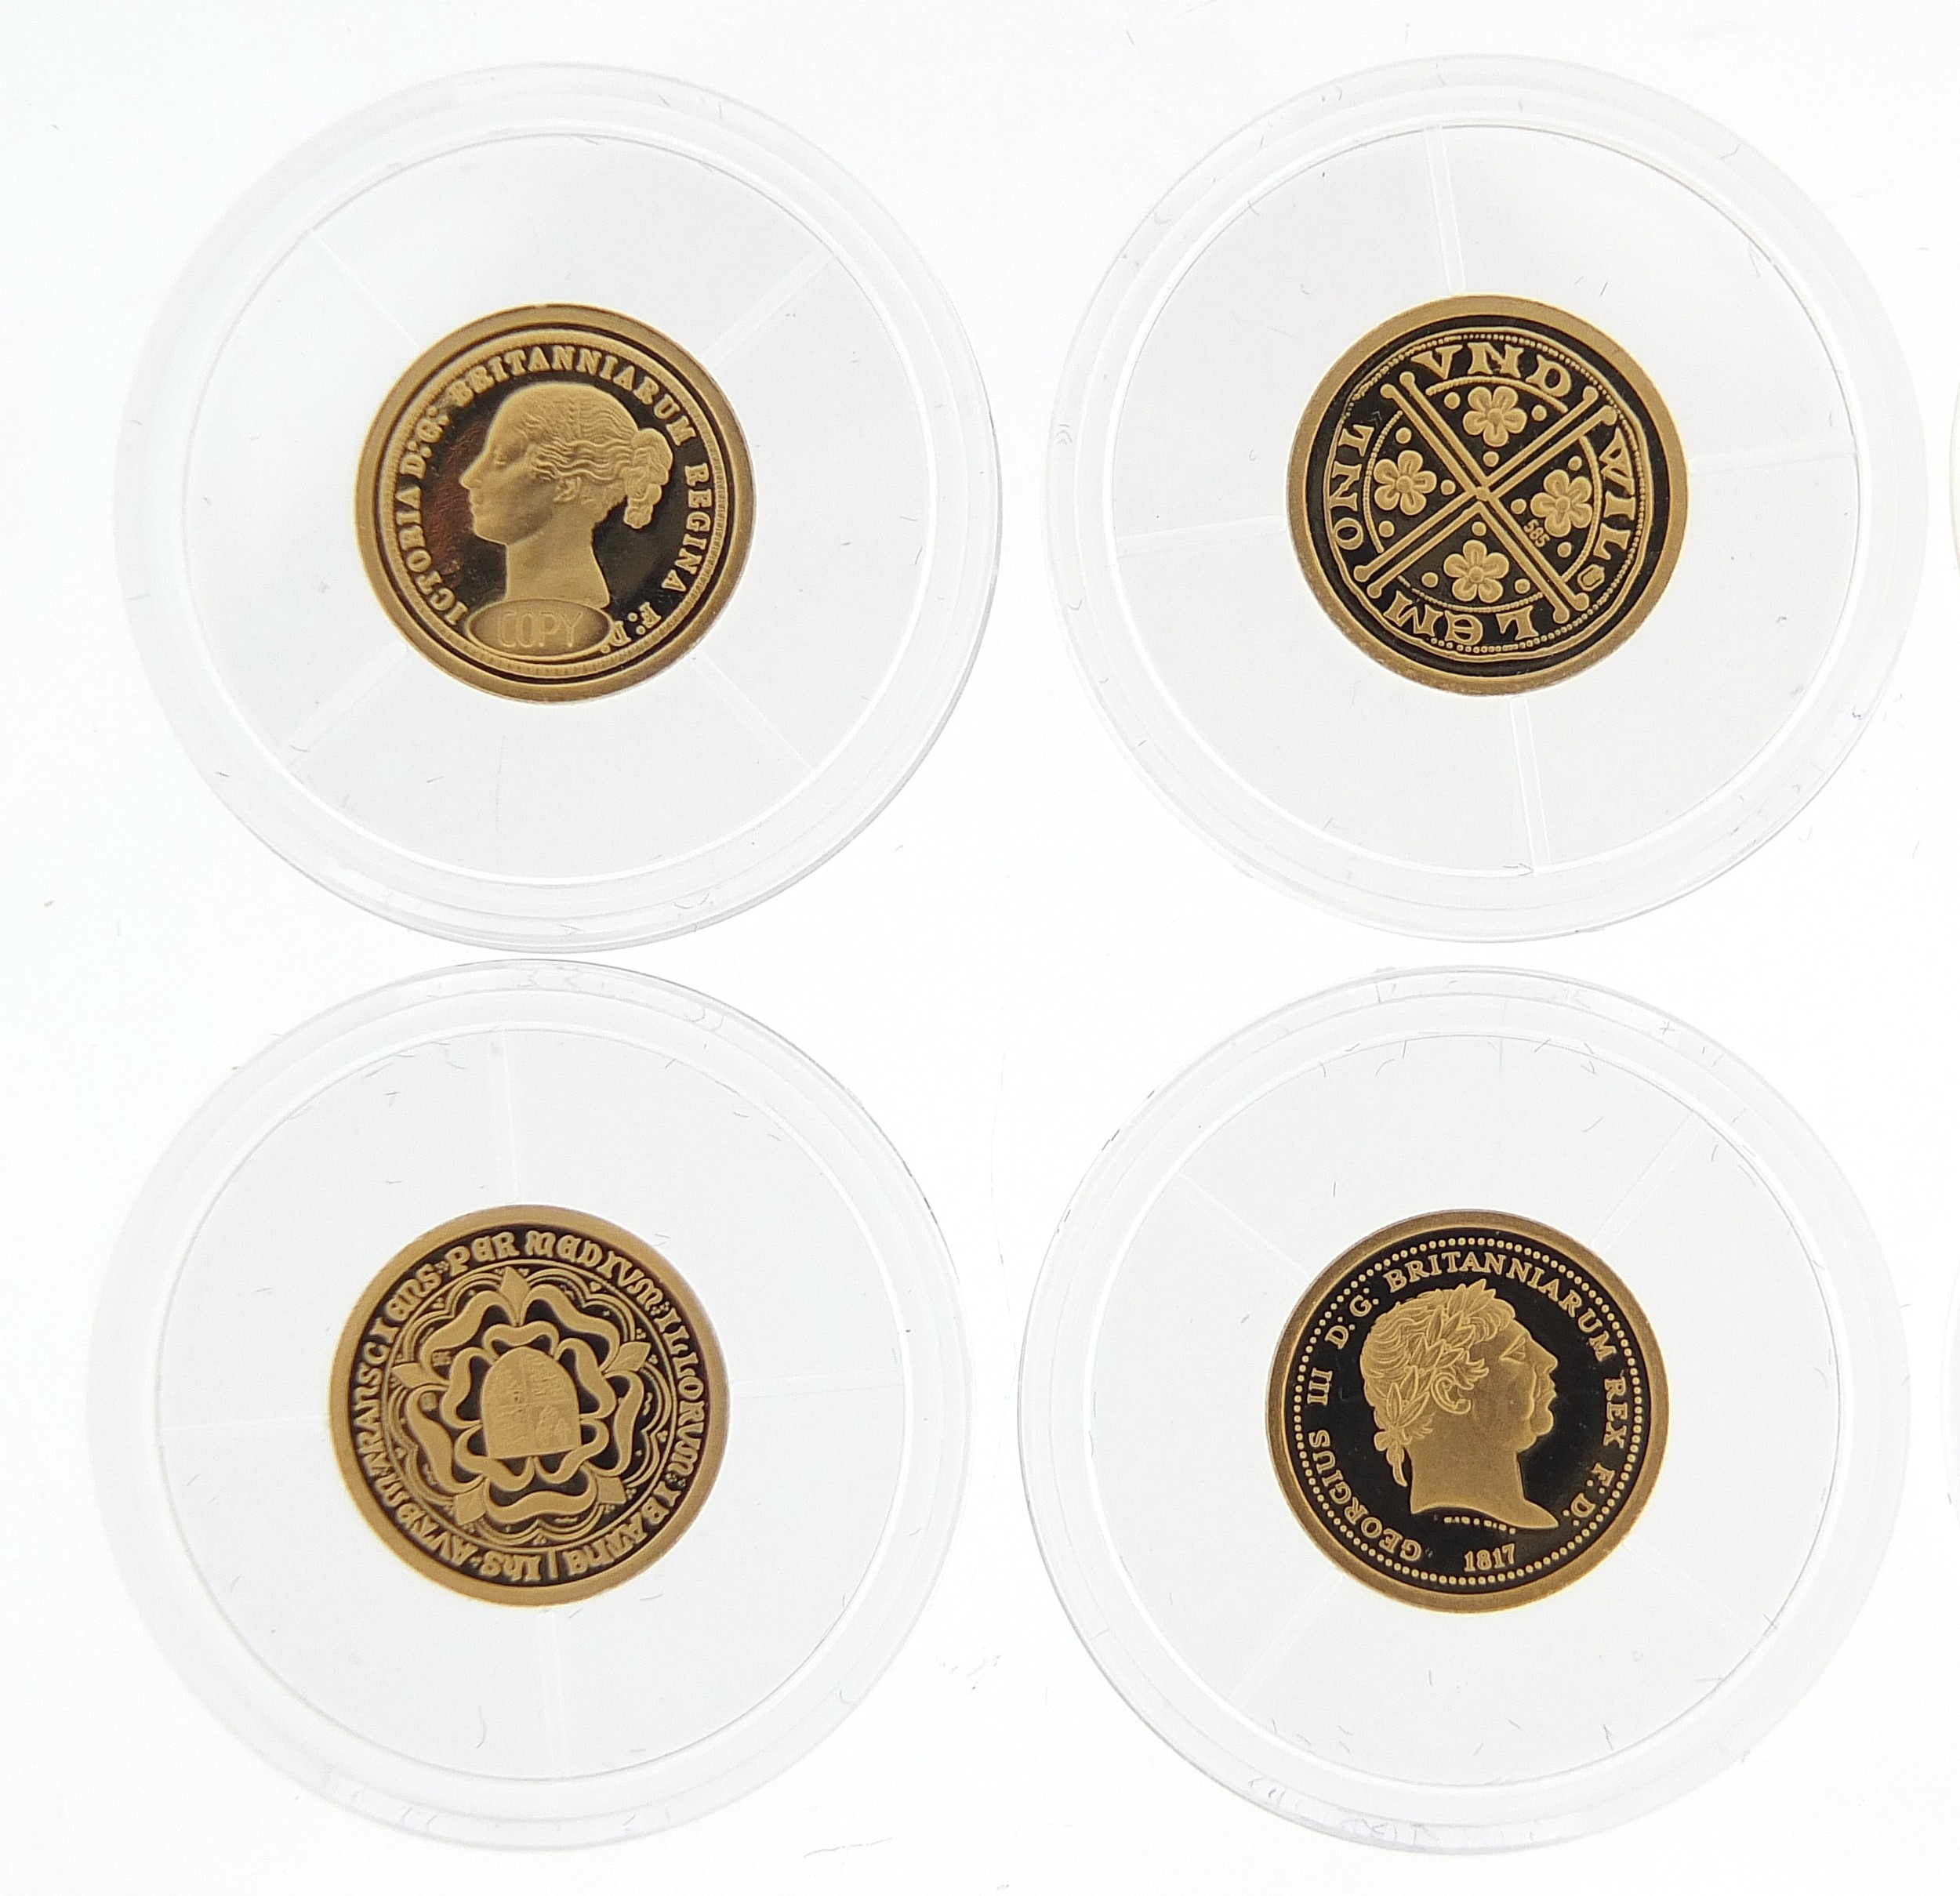 Windsor mint set of six solid gold Eagle replicas with presentation case and certificates - this lot - Image 5 of 8